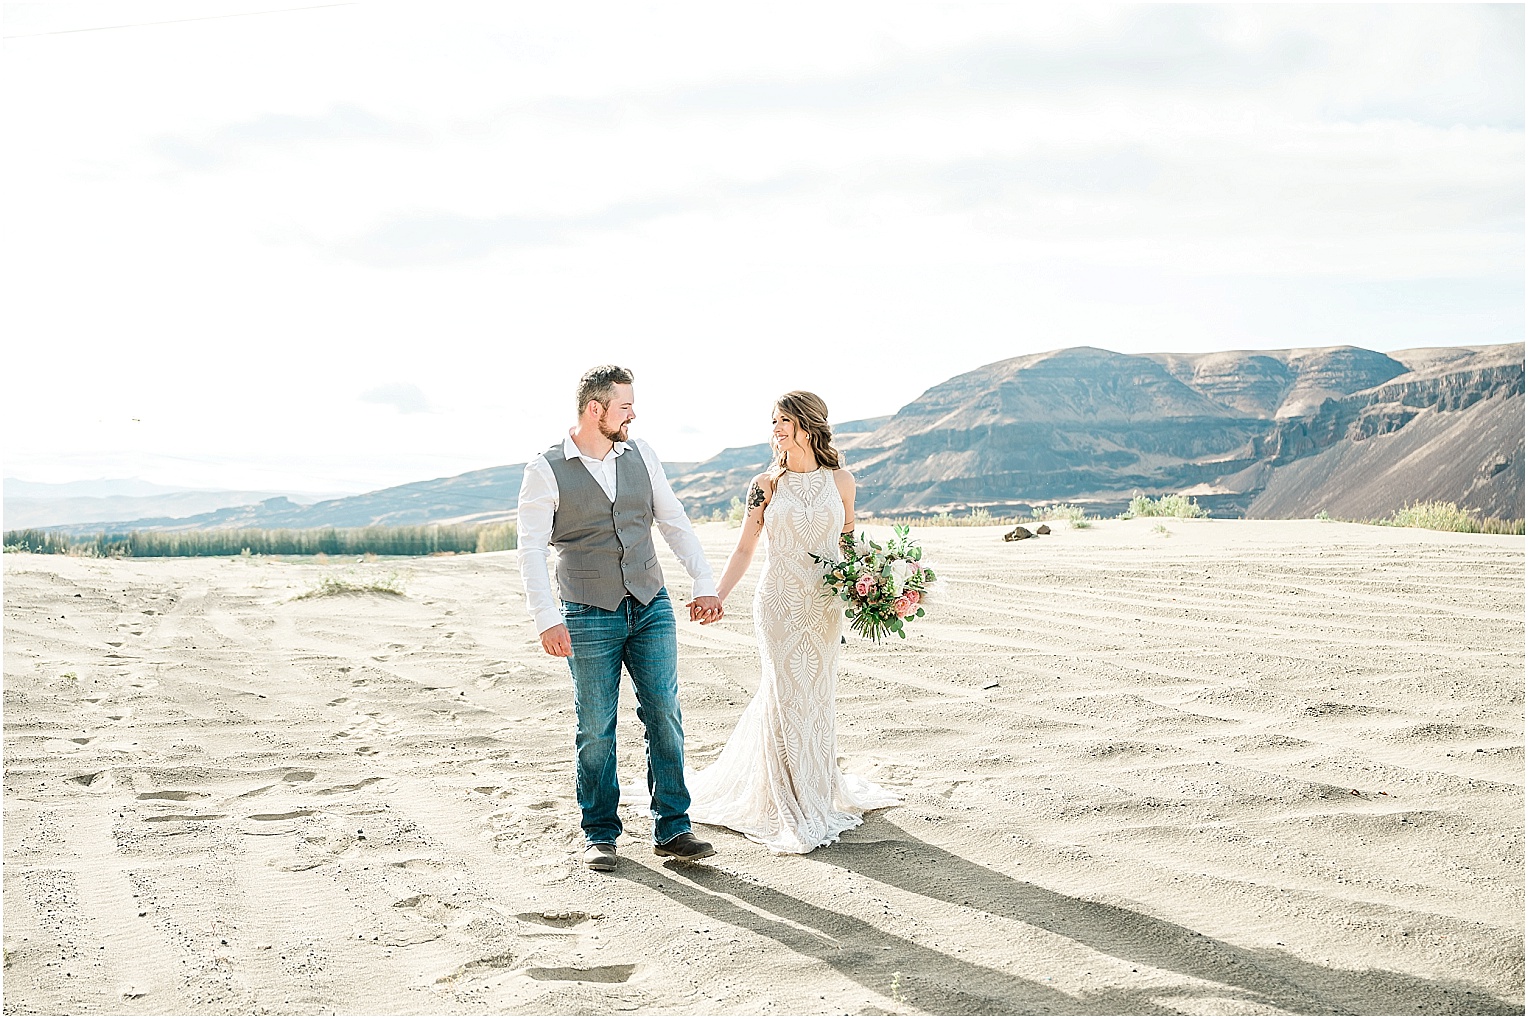 Eastern Washington Elopement Photographer Mike and Carley couple walking on sand dunes